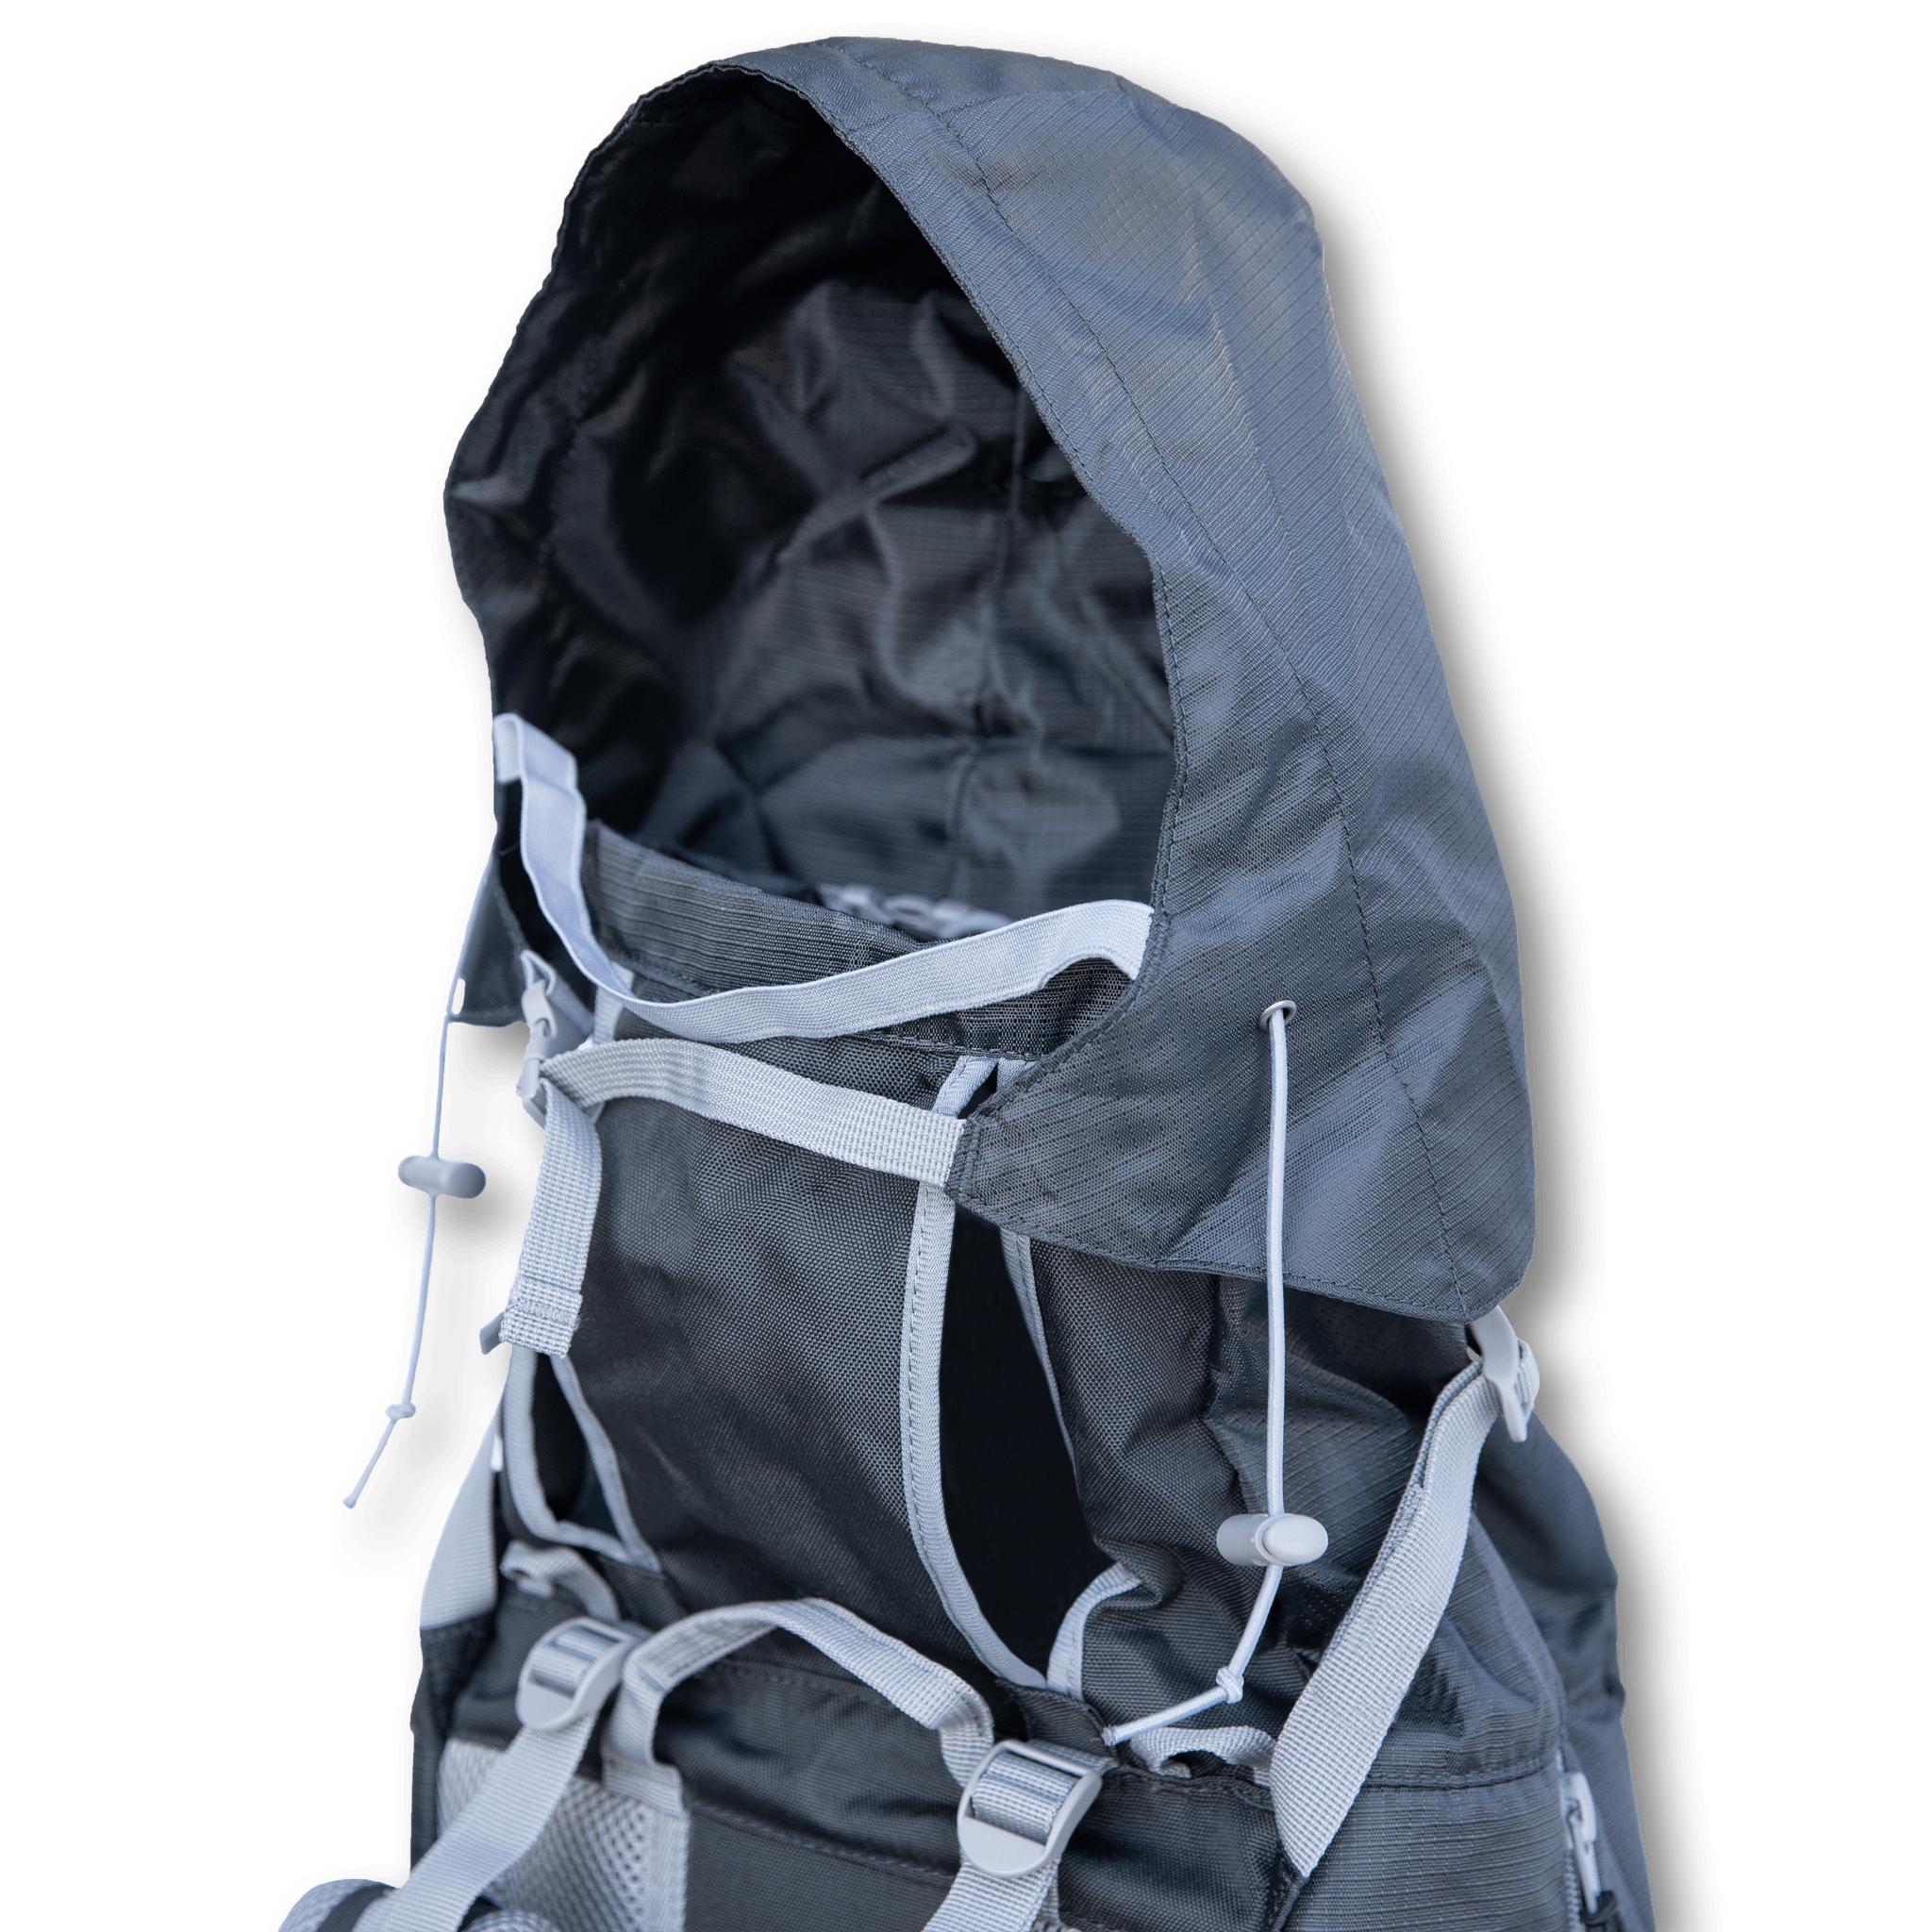 K9 Sport Sack Rover 2-Backpack-Pet's Choice Supply